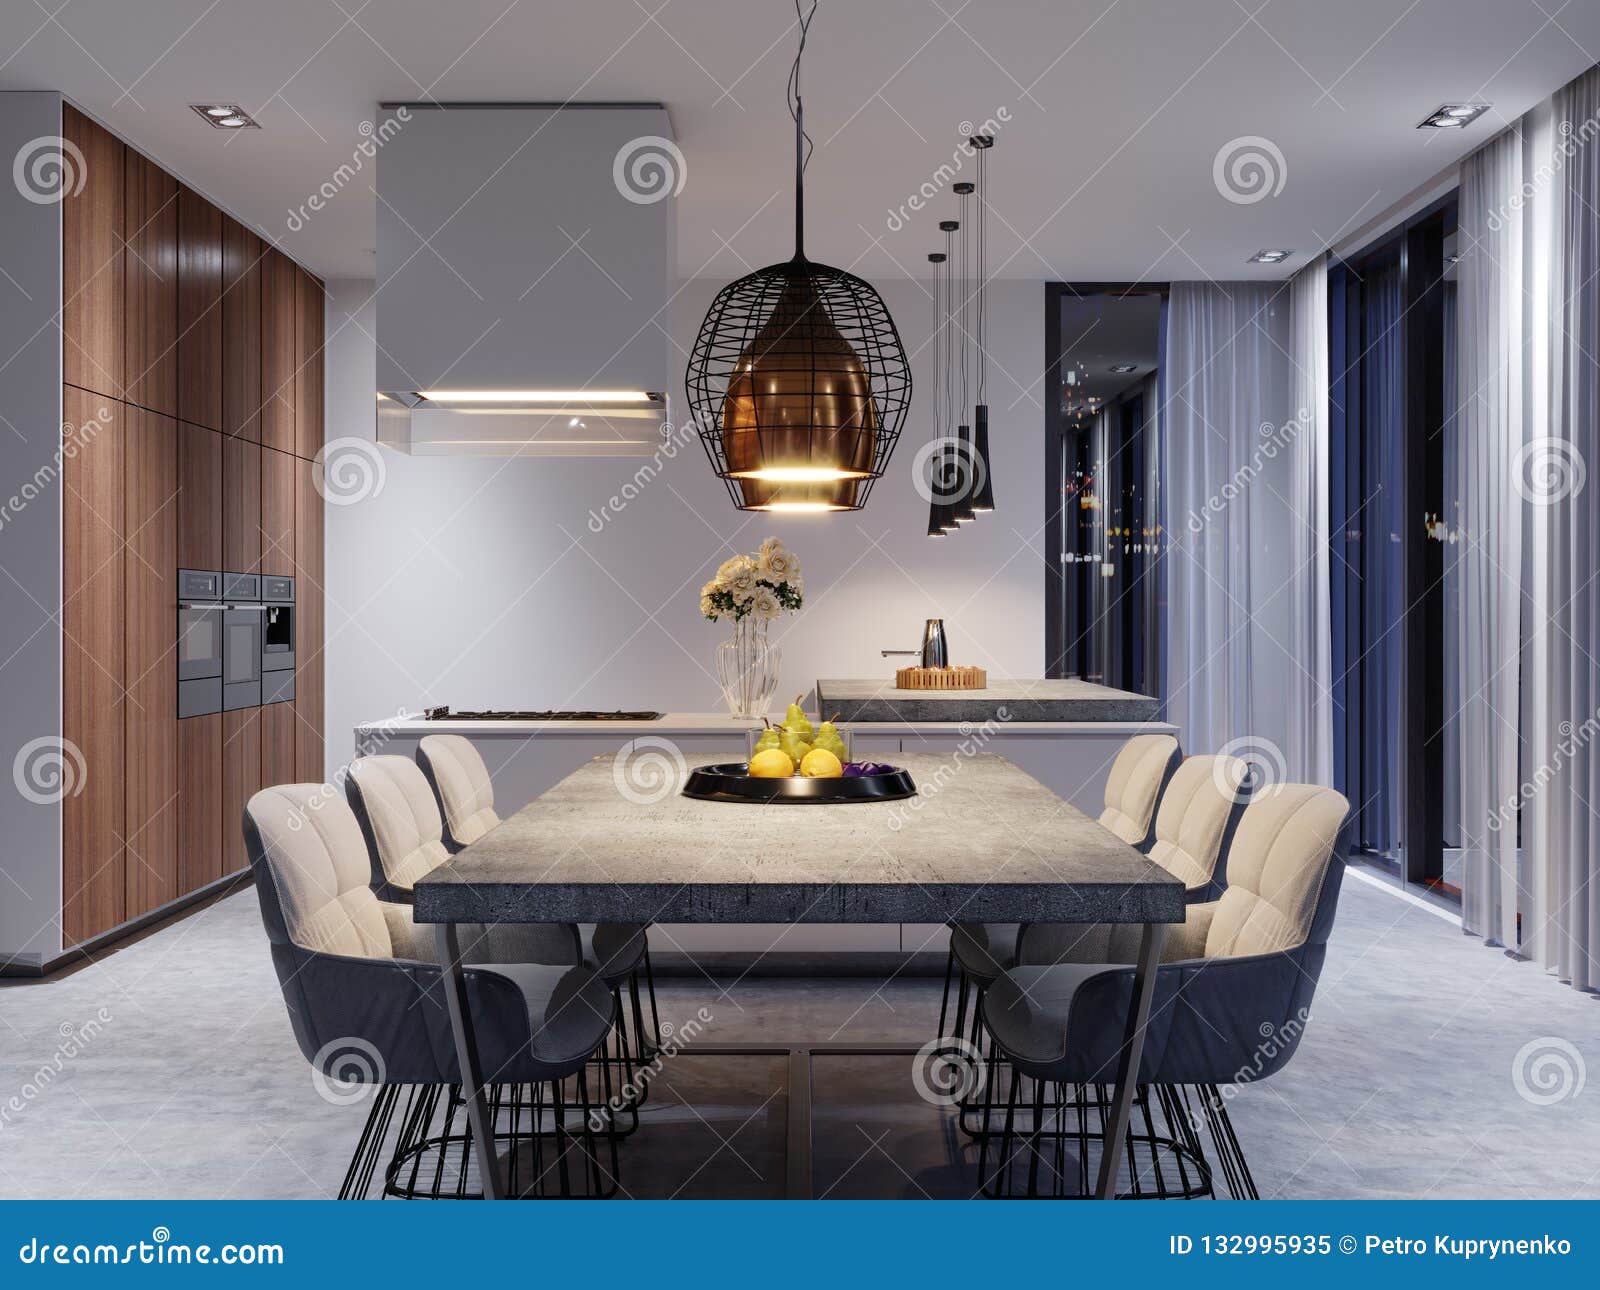 A Large Dining Table With A Concrete Worktop Large Designer Hanging Lamps And Six Stylish Chairs Stock Illustration Illustration Of Elegant Interior 132995935